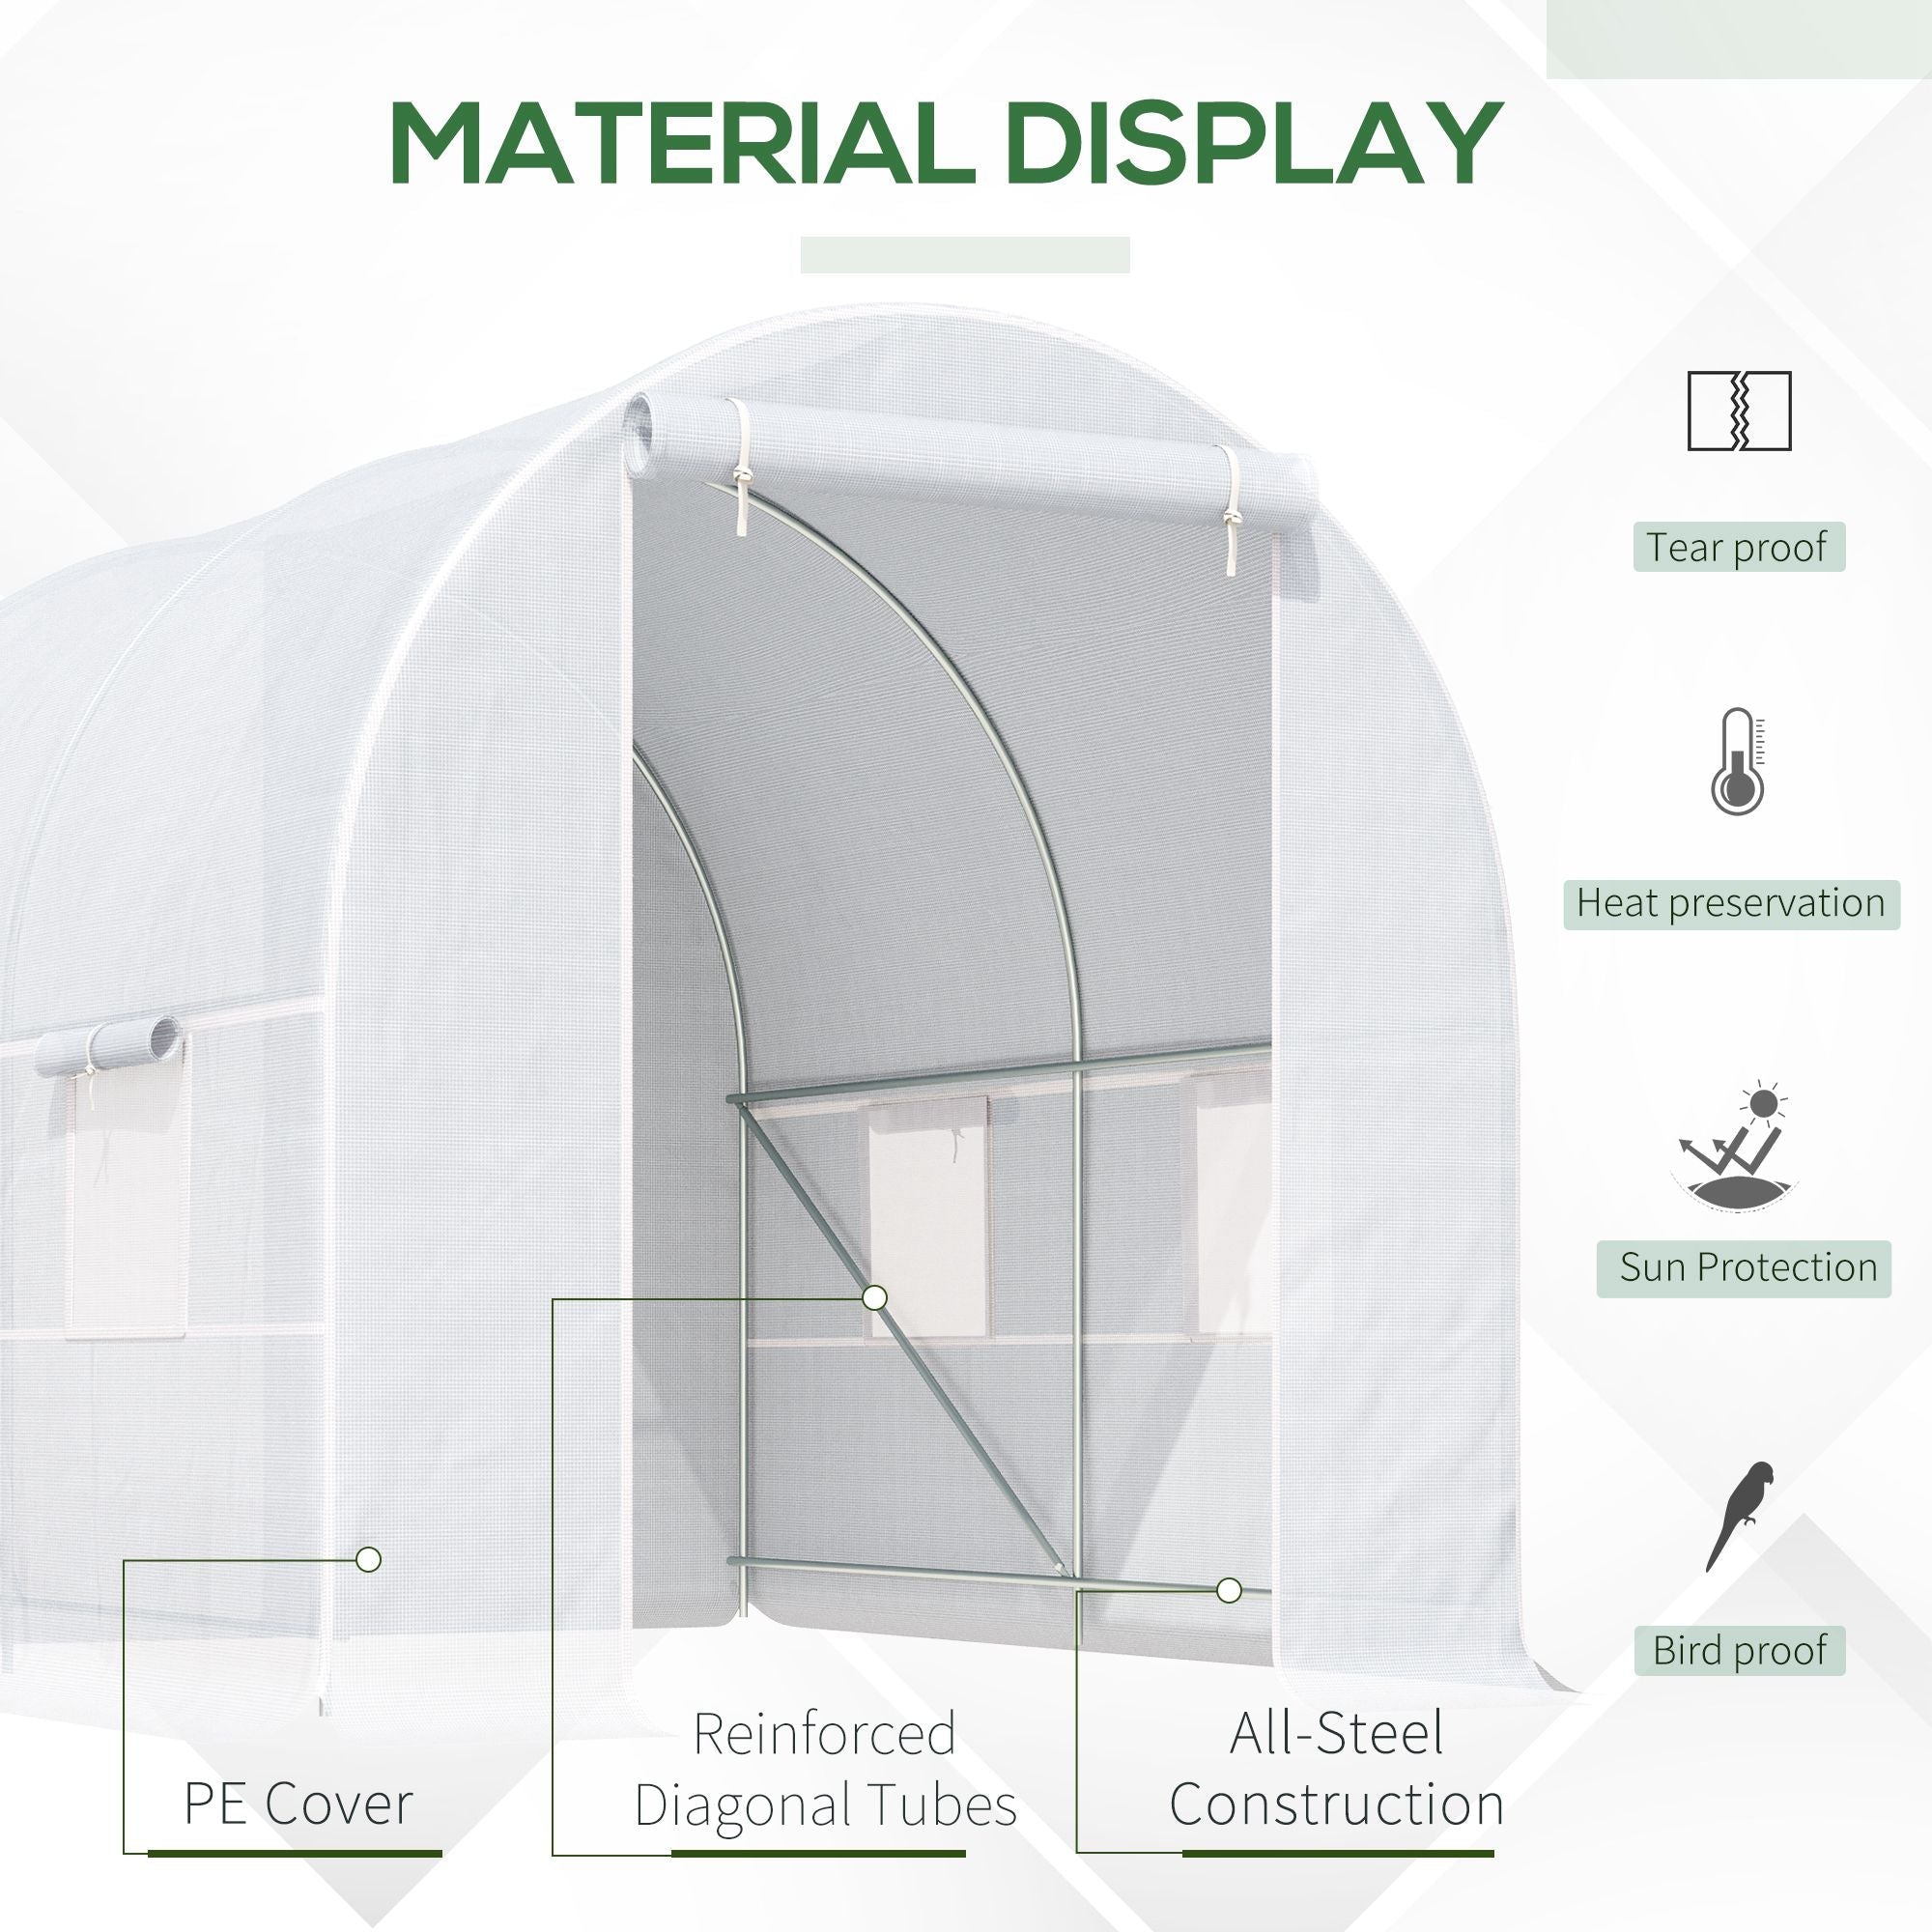 2.5 x 2 x 2 m Large Galvanized Steel Frame Outdoor Poly Tunnel Garden Walk-In Patio Greenhouse - White-3